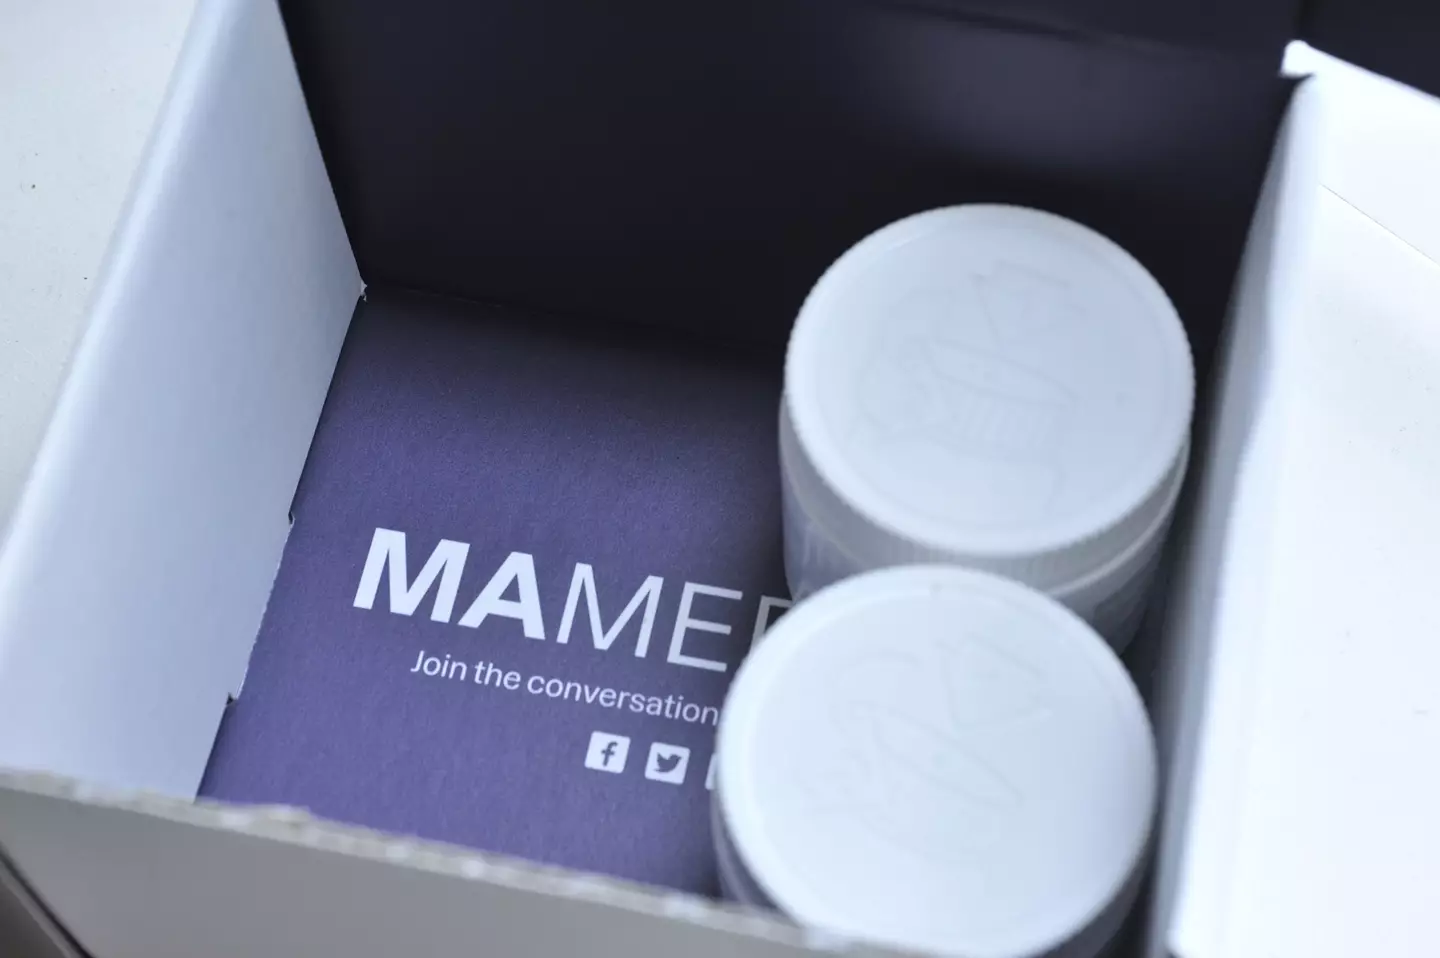 Mamedica is a private clinic with a linked pharmacy which specialises in cannabis-based prescriptions for patients searching for medication across pain, psychiatry, neurology, palliative care, and cancer.